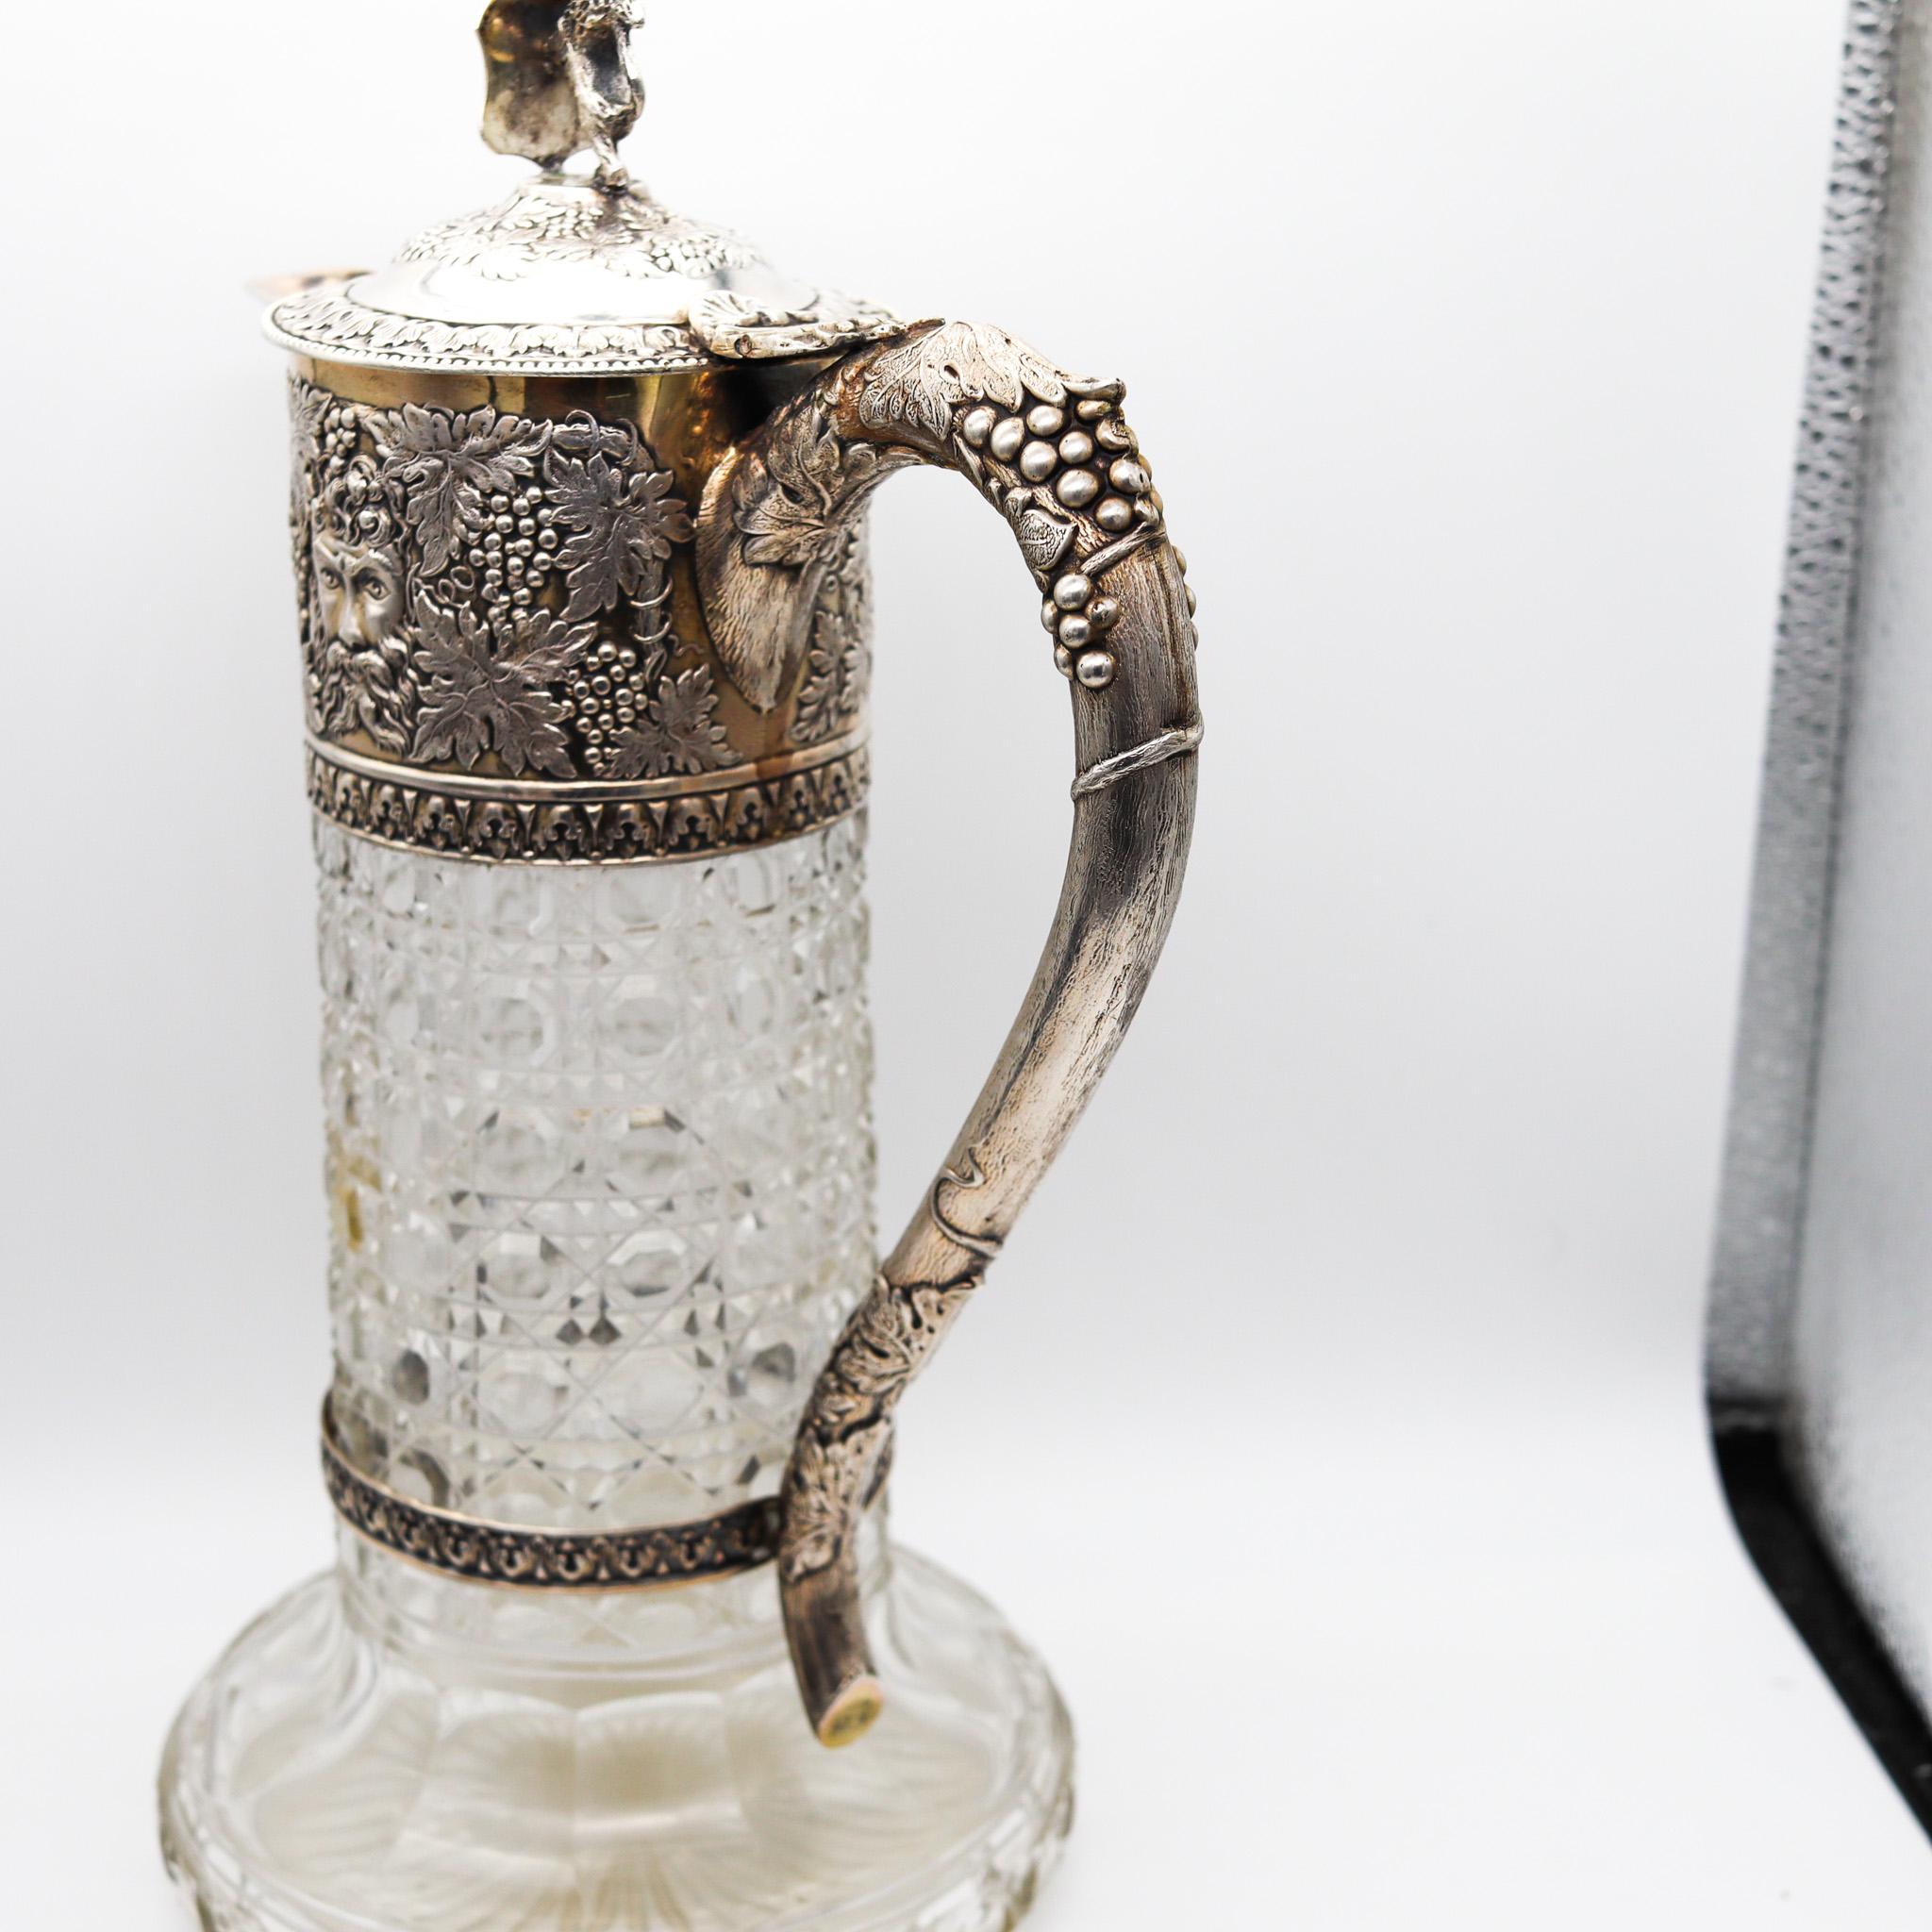 English Charles Boyton 1899 London Wine Ewer Pitcher In Cut Crystal And .925 Sterling For Sale